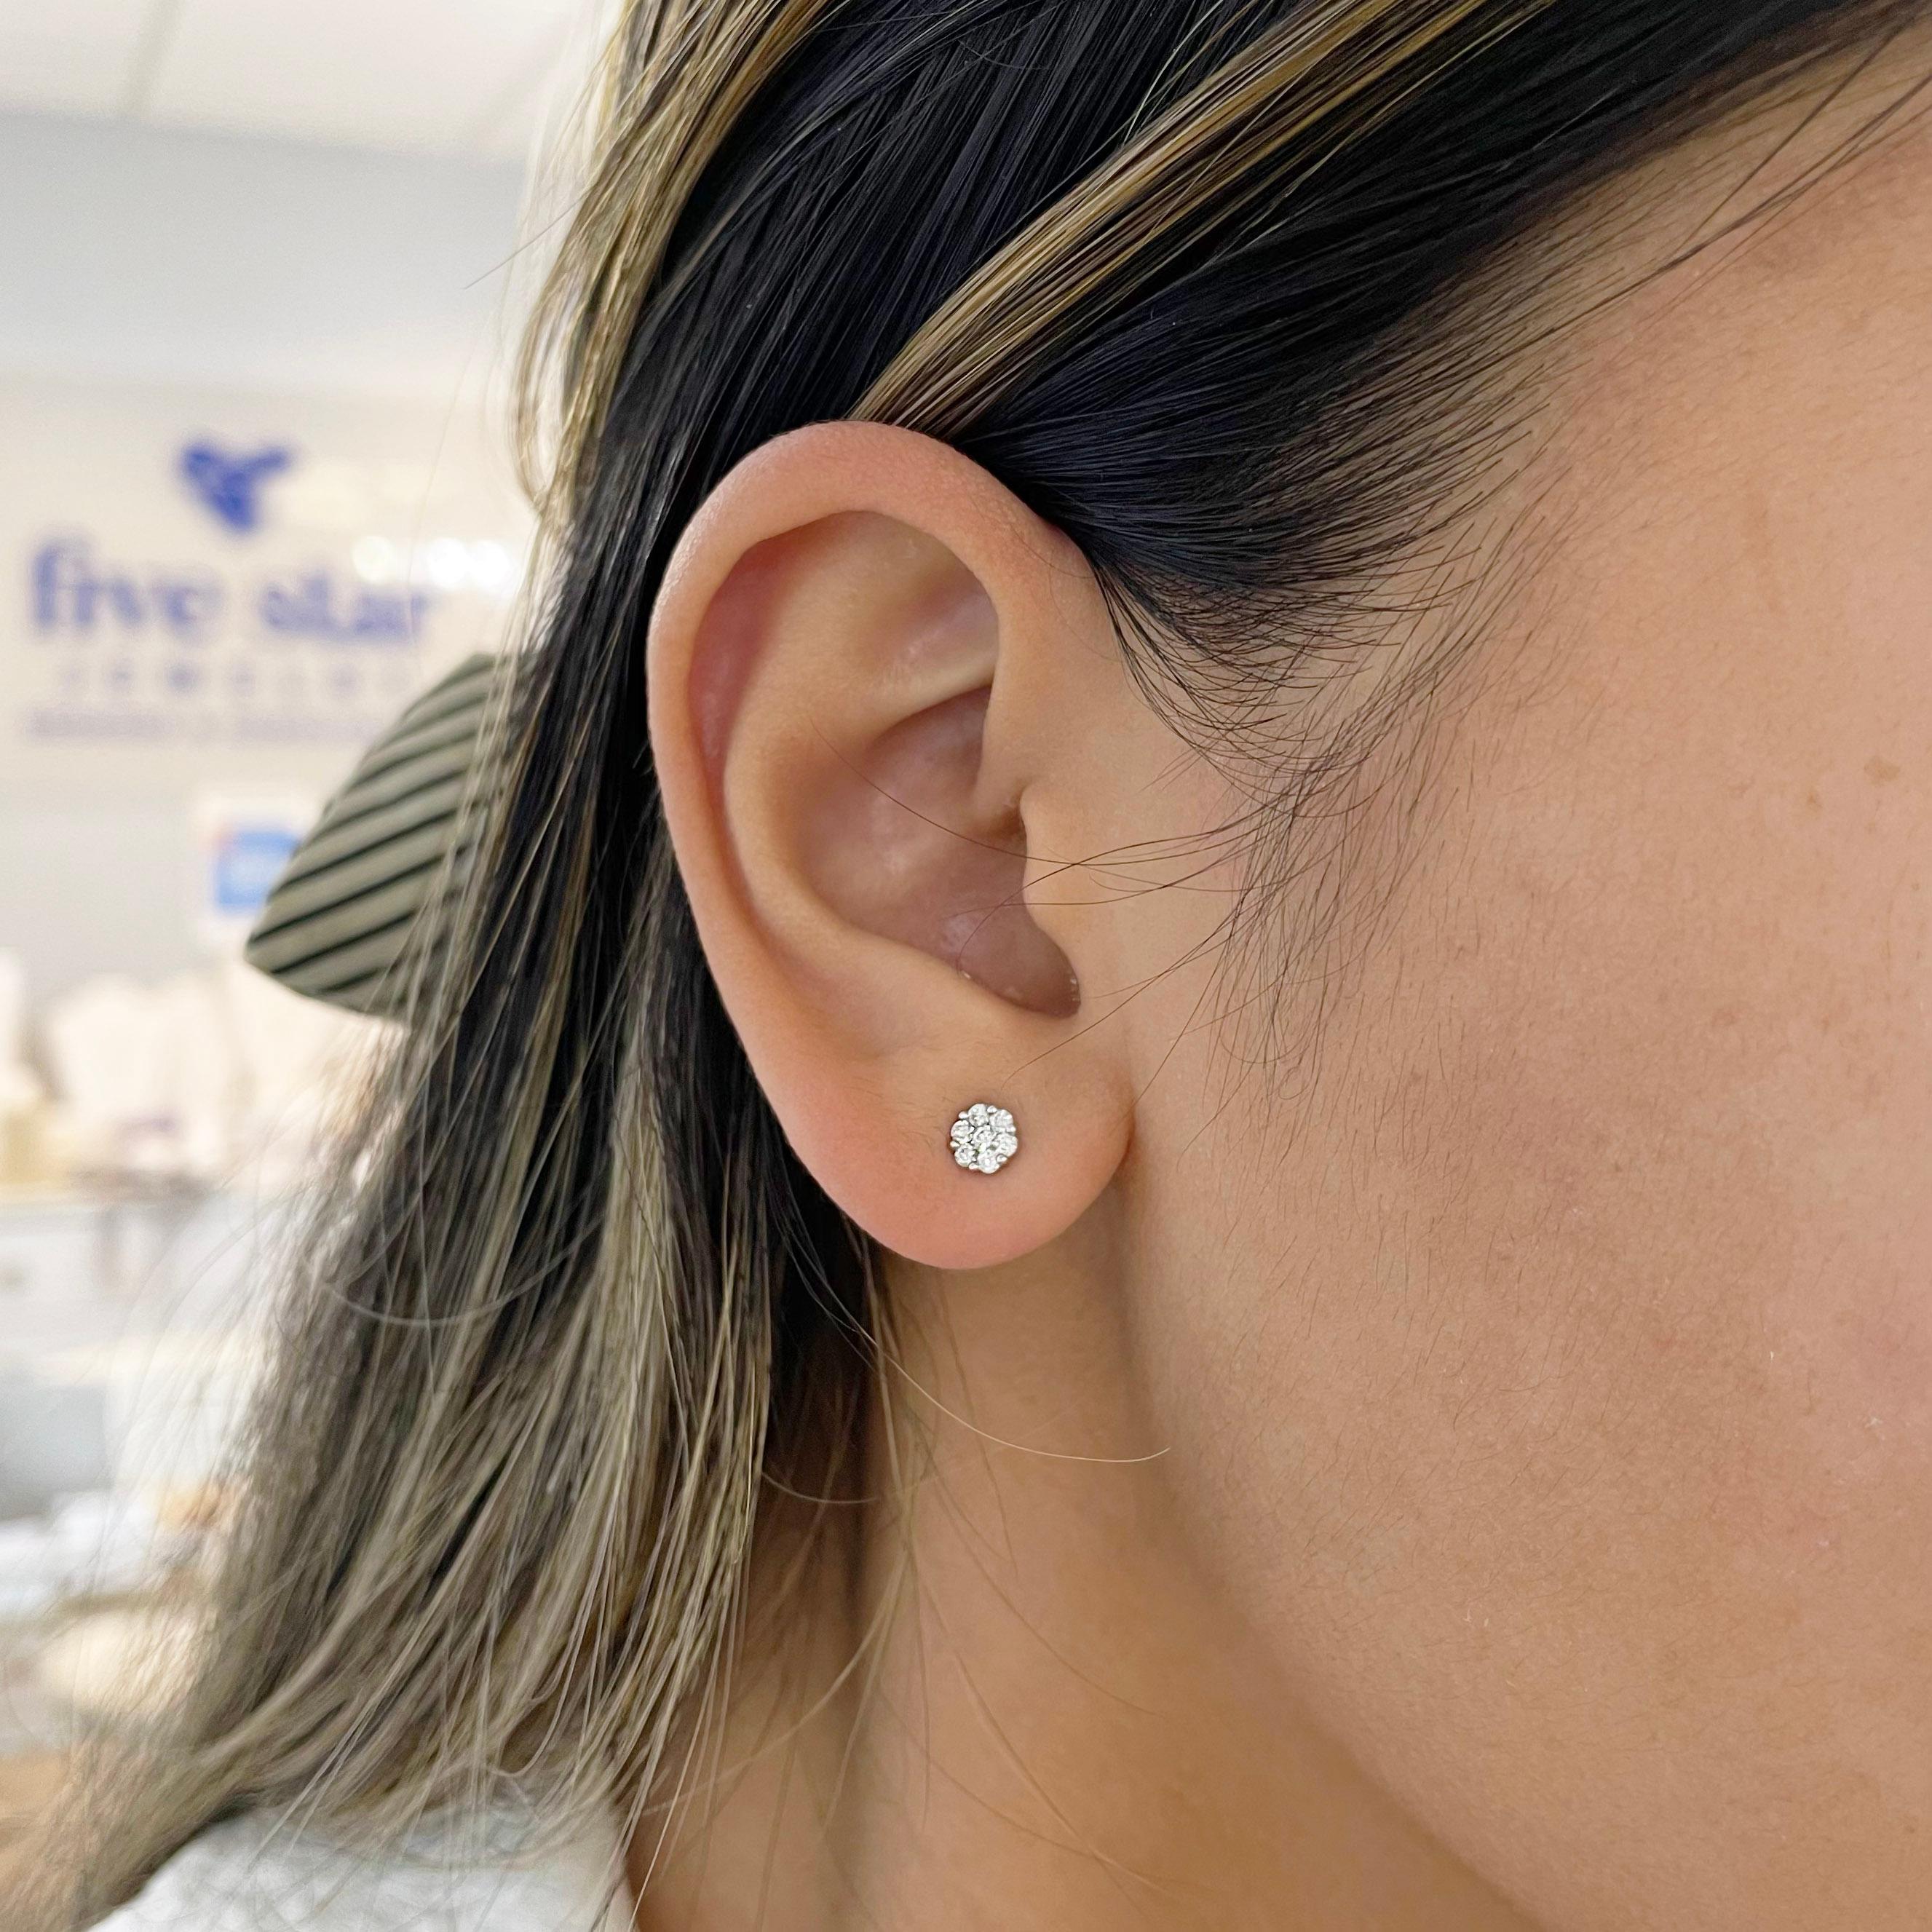 These dainty diamond studs mimics a floral design. Each stud is made up of 7 round brilliant diamonds in a white gold setting exaggerating the white of the diamonds. The details for these gorgeous earrings are listed below:
1 Set
Metal Quality: 14K